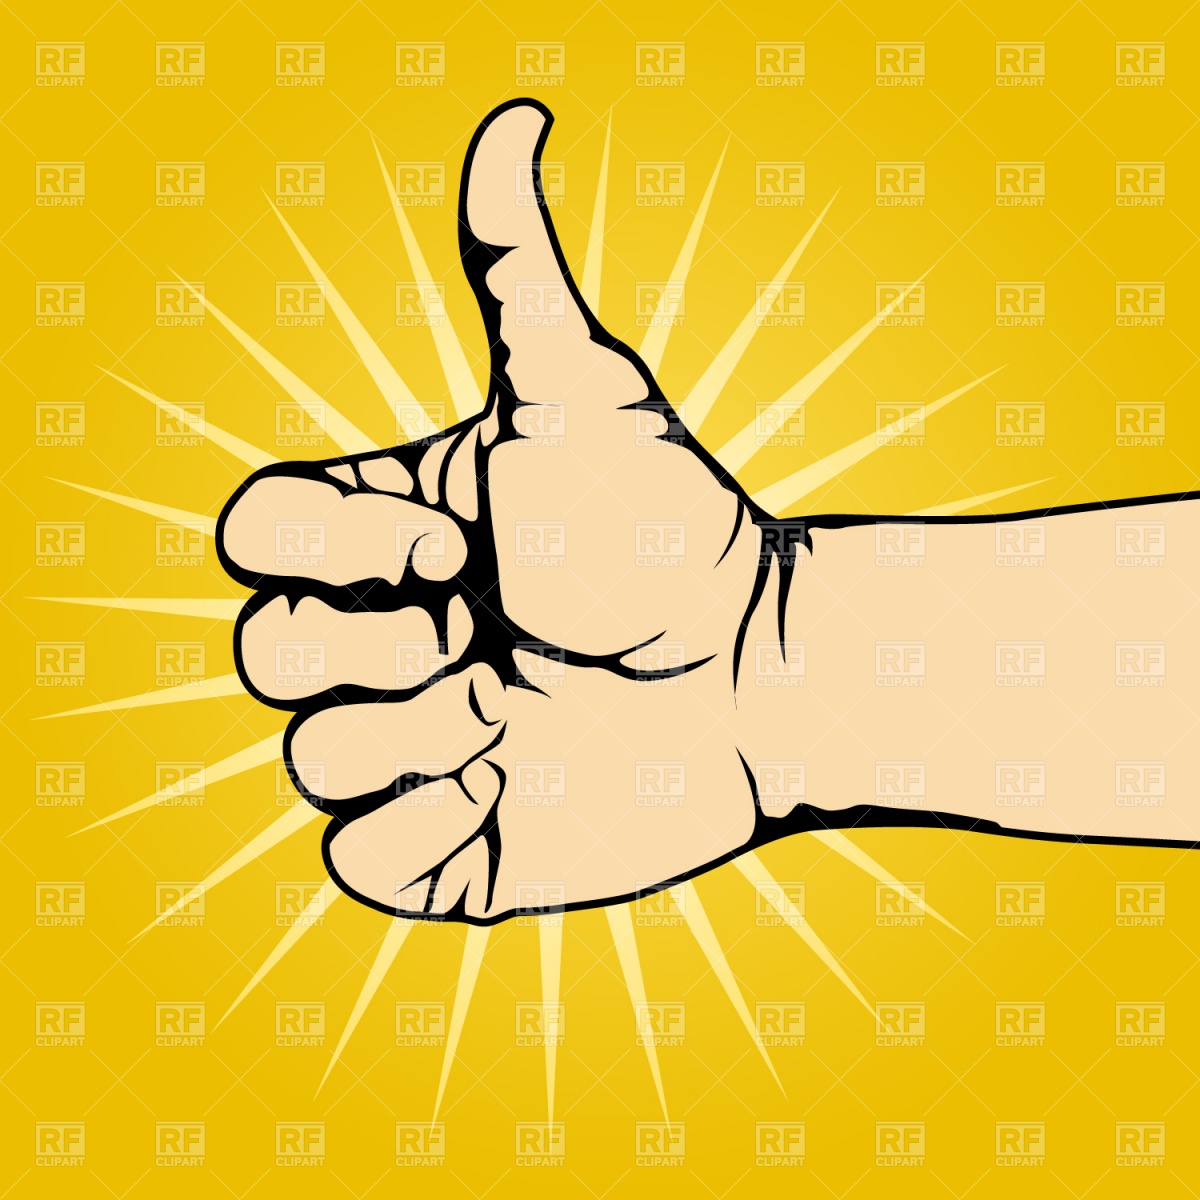 Thumbs Up 1576 Signs Symbols Maps Download Royalty Free Vector